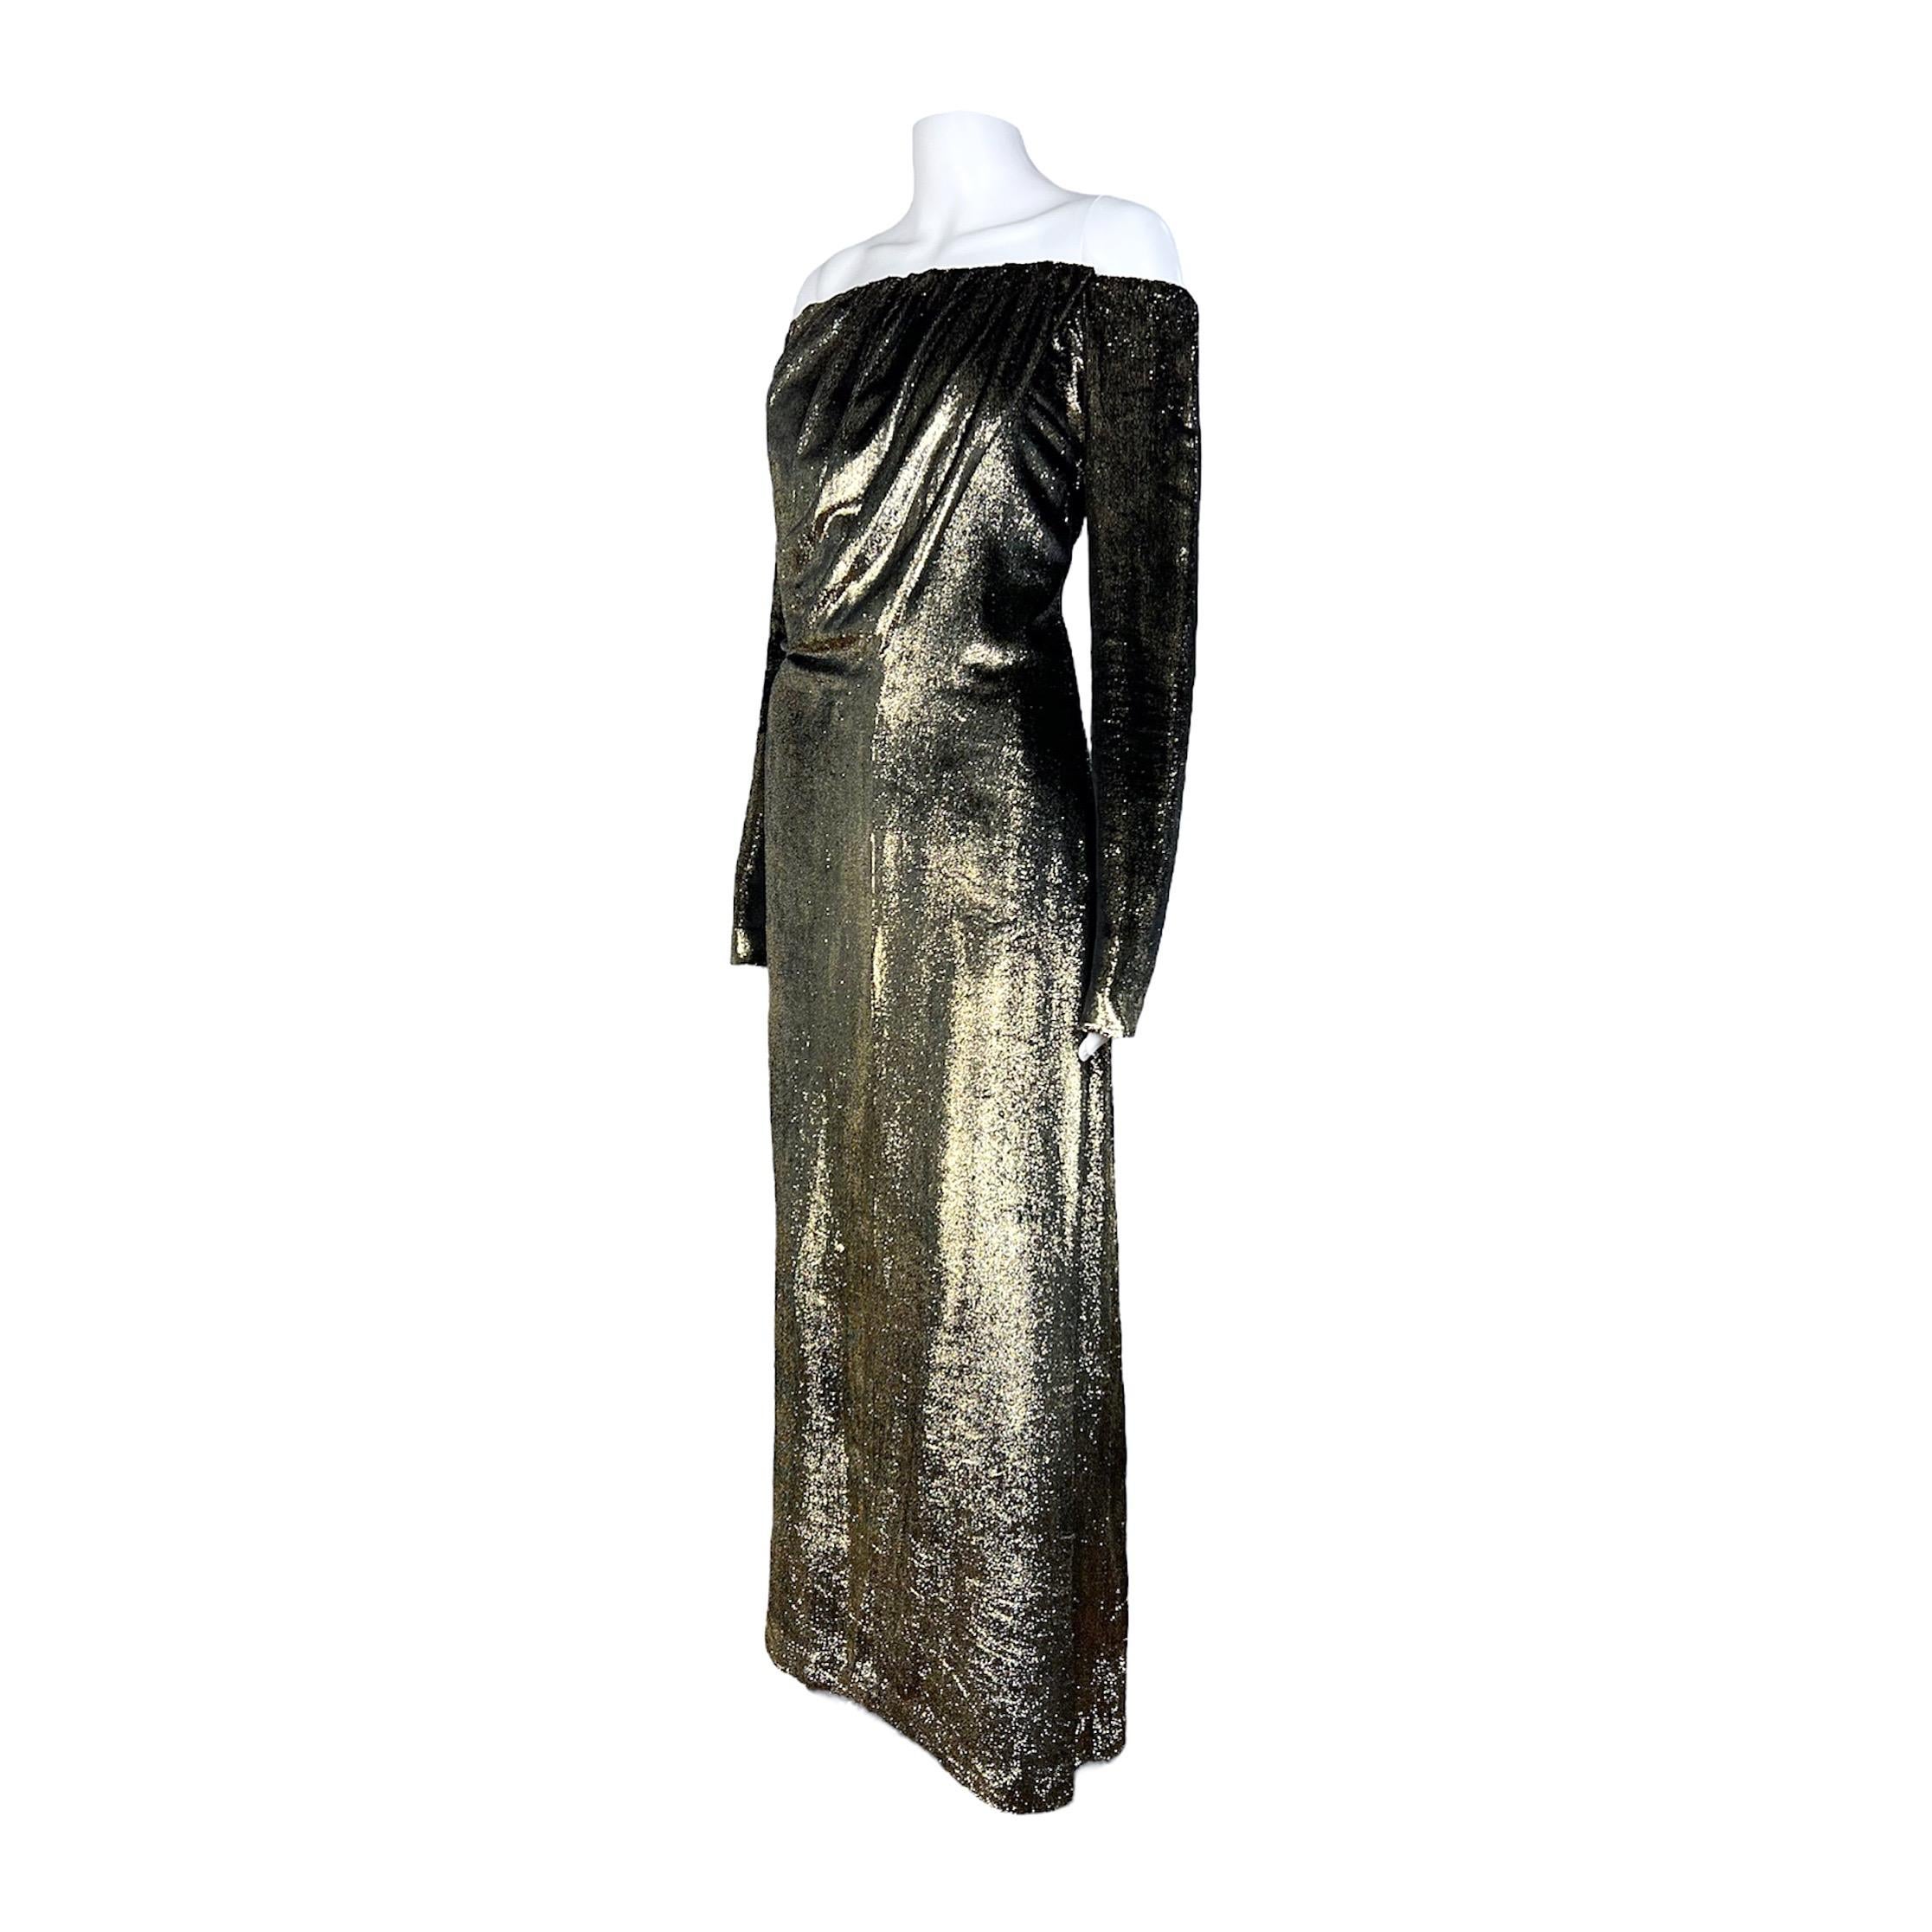 Exquisite and unparalleled, behold this mesmerizing Yves Saint Laurent gold lamé gown from the esteemed Spring Summer 1989 collection. Delicately resting off the shoulder, it gracefully cascades, adorning the bust with masterful drapery. Enhanced by